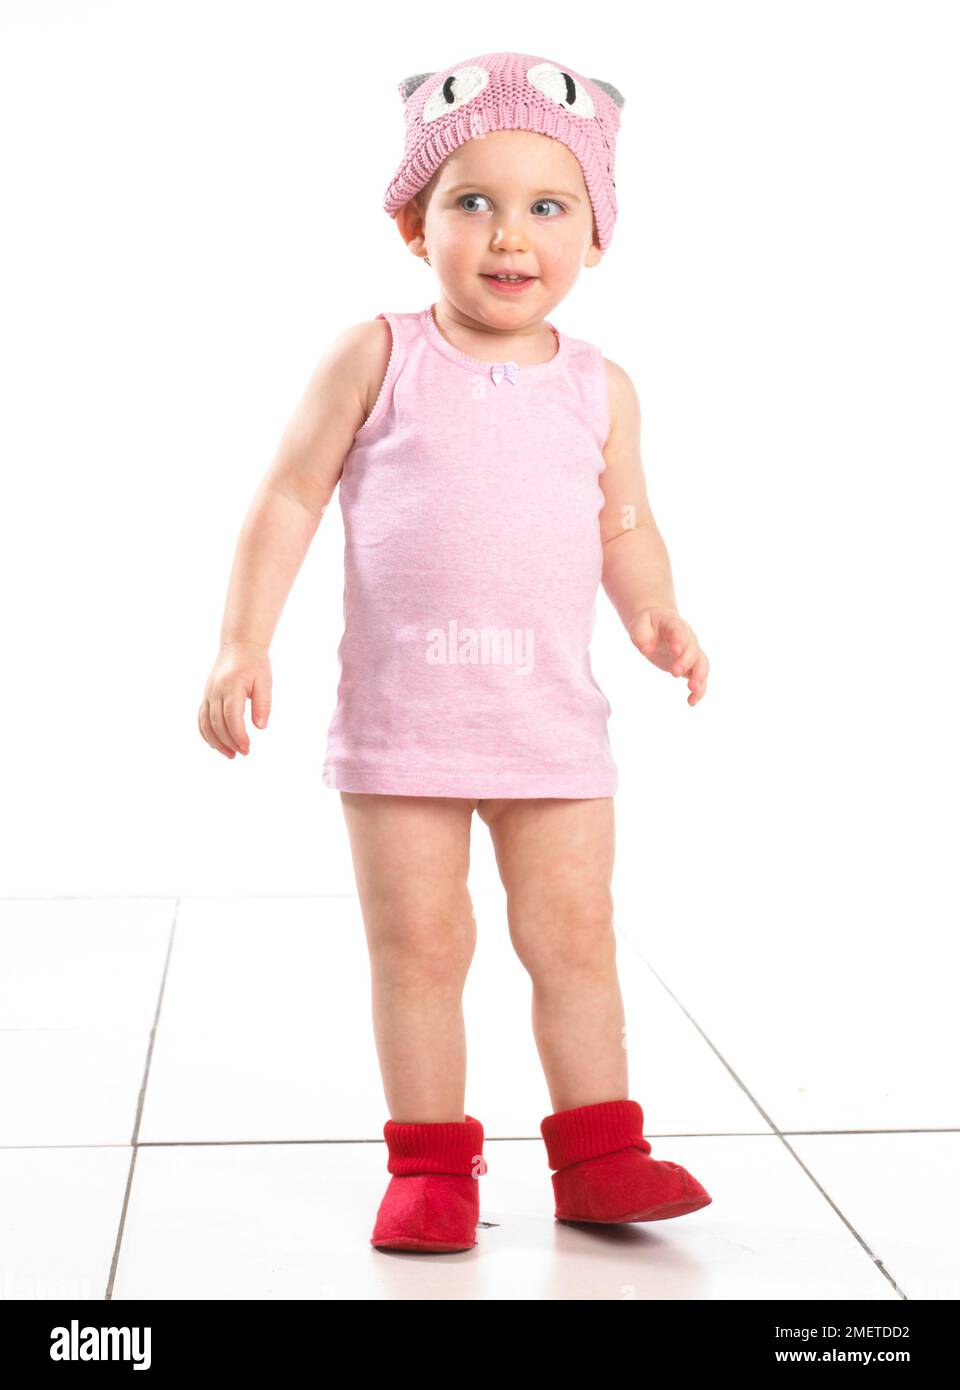 Girl wearing red socks, pink top and pink wool hat, 19 months Stock Photo